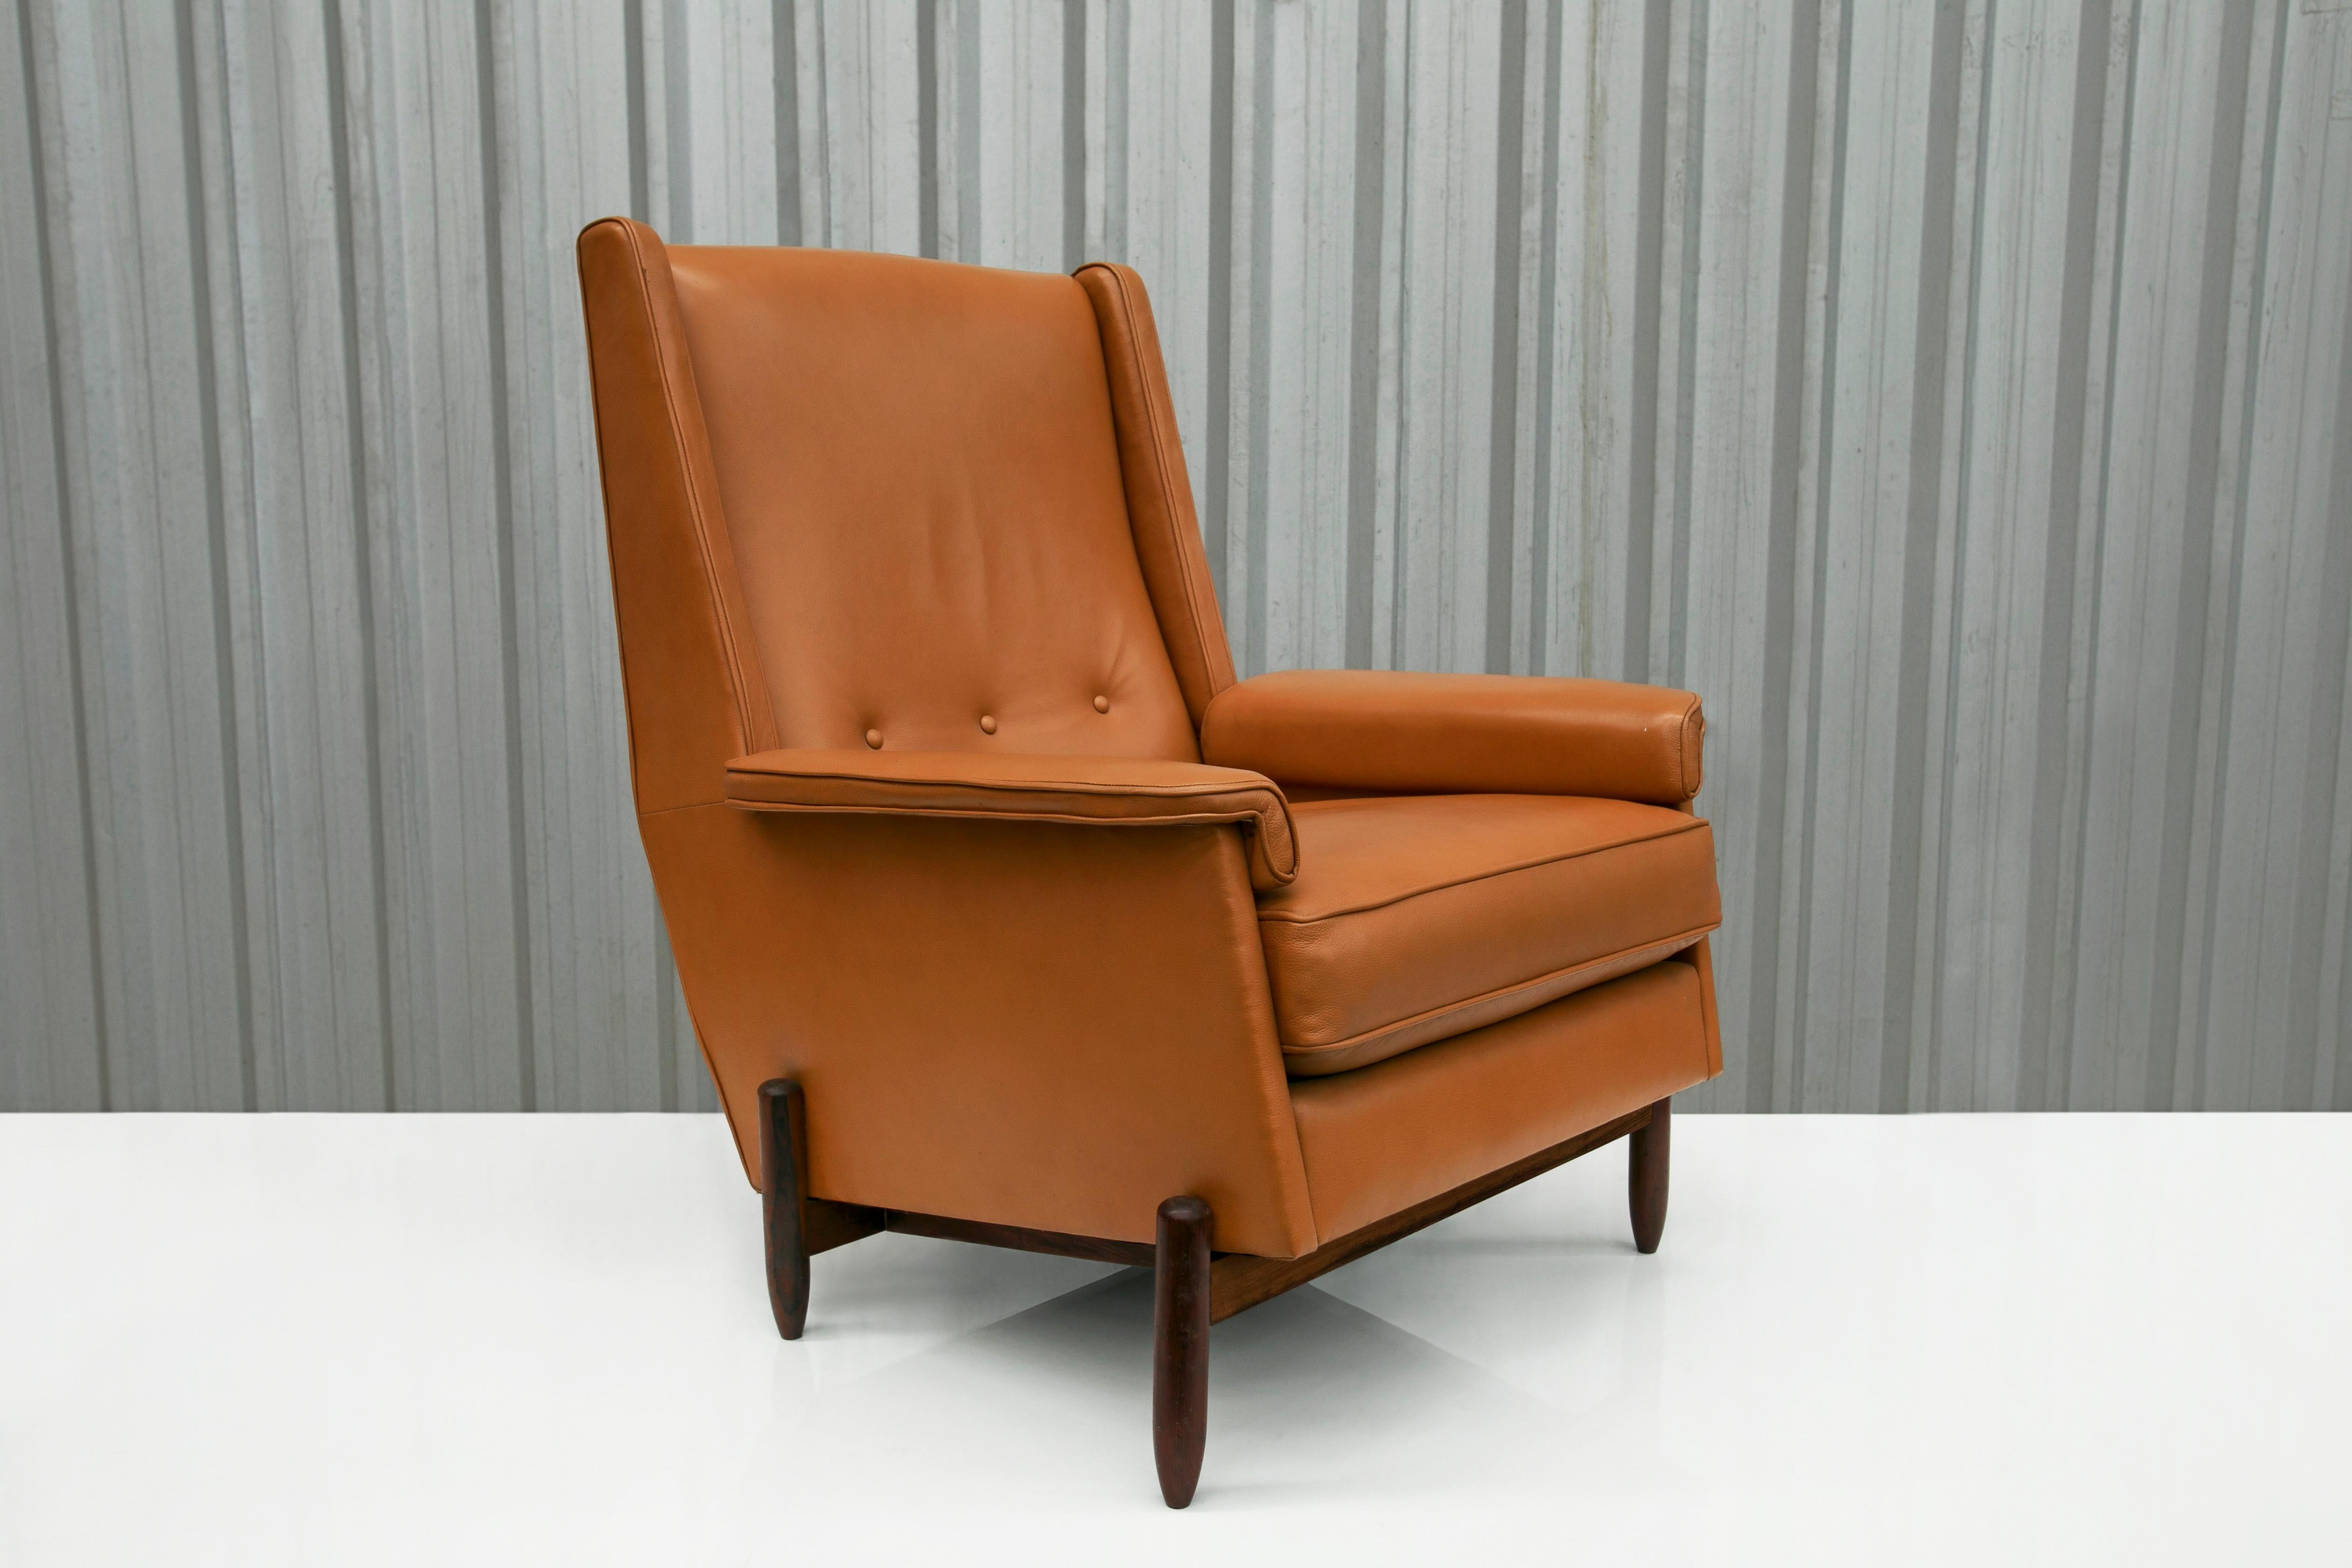 Available today, this spectacular Brazilian modern club chair, designed by Jorge Jabour in the sixties, is beautiful! The legs and body of this chair are made with hardwood and have upholstered seats in orange leather. The wood on this piece has